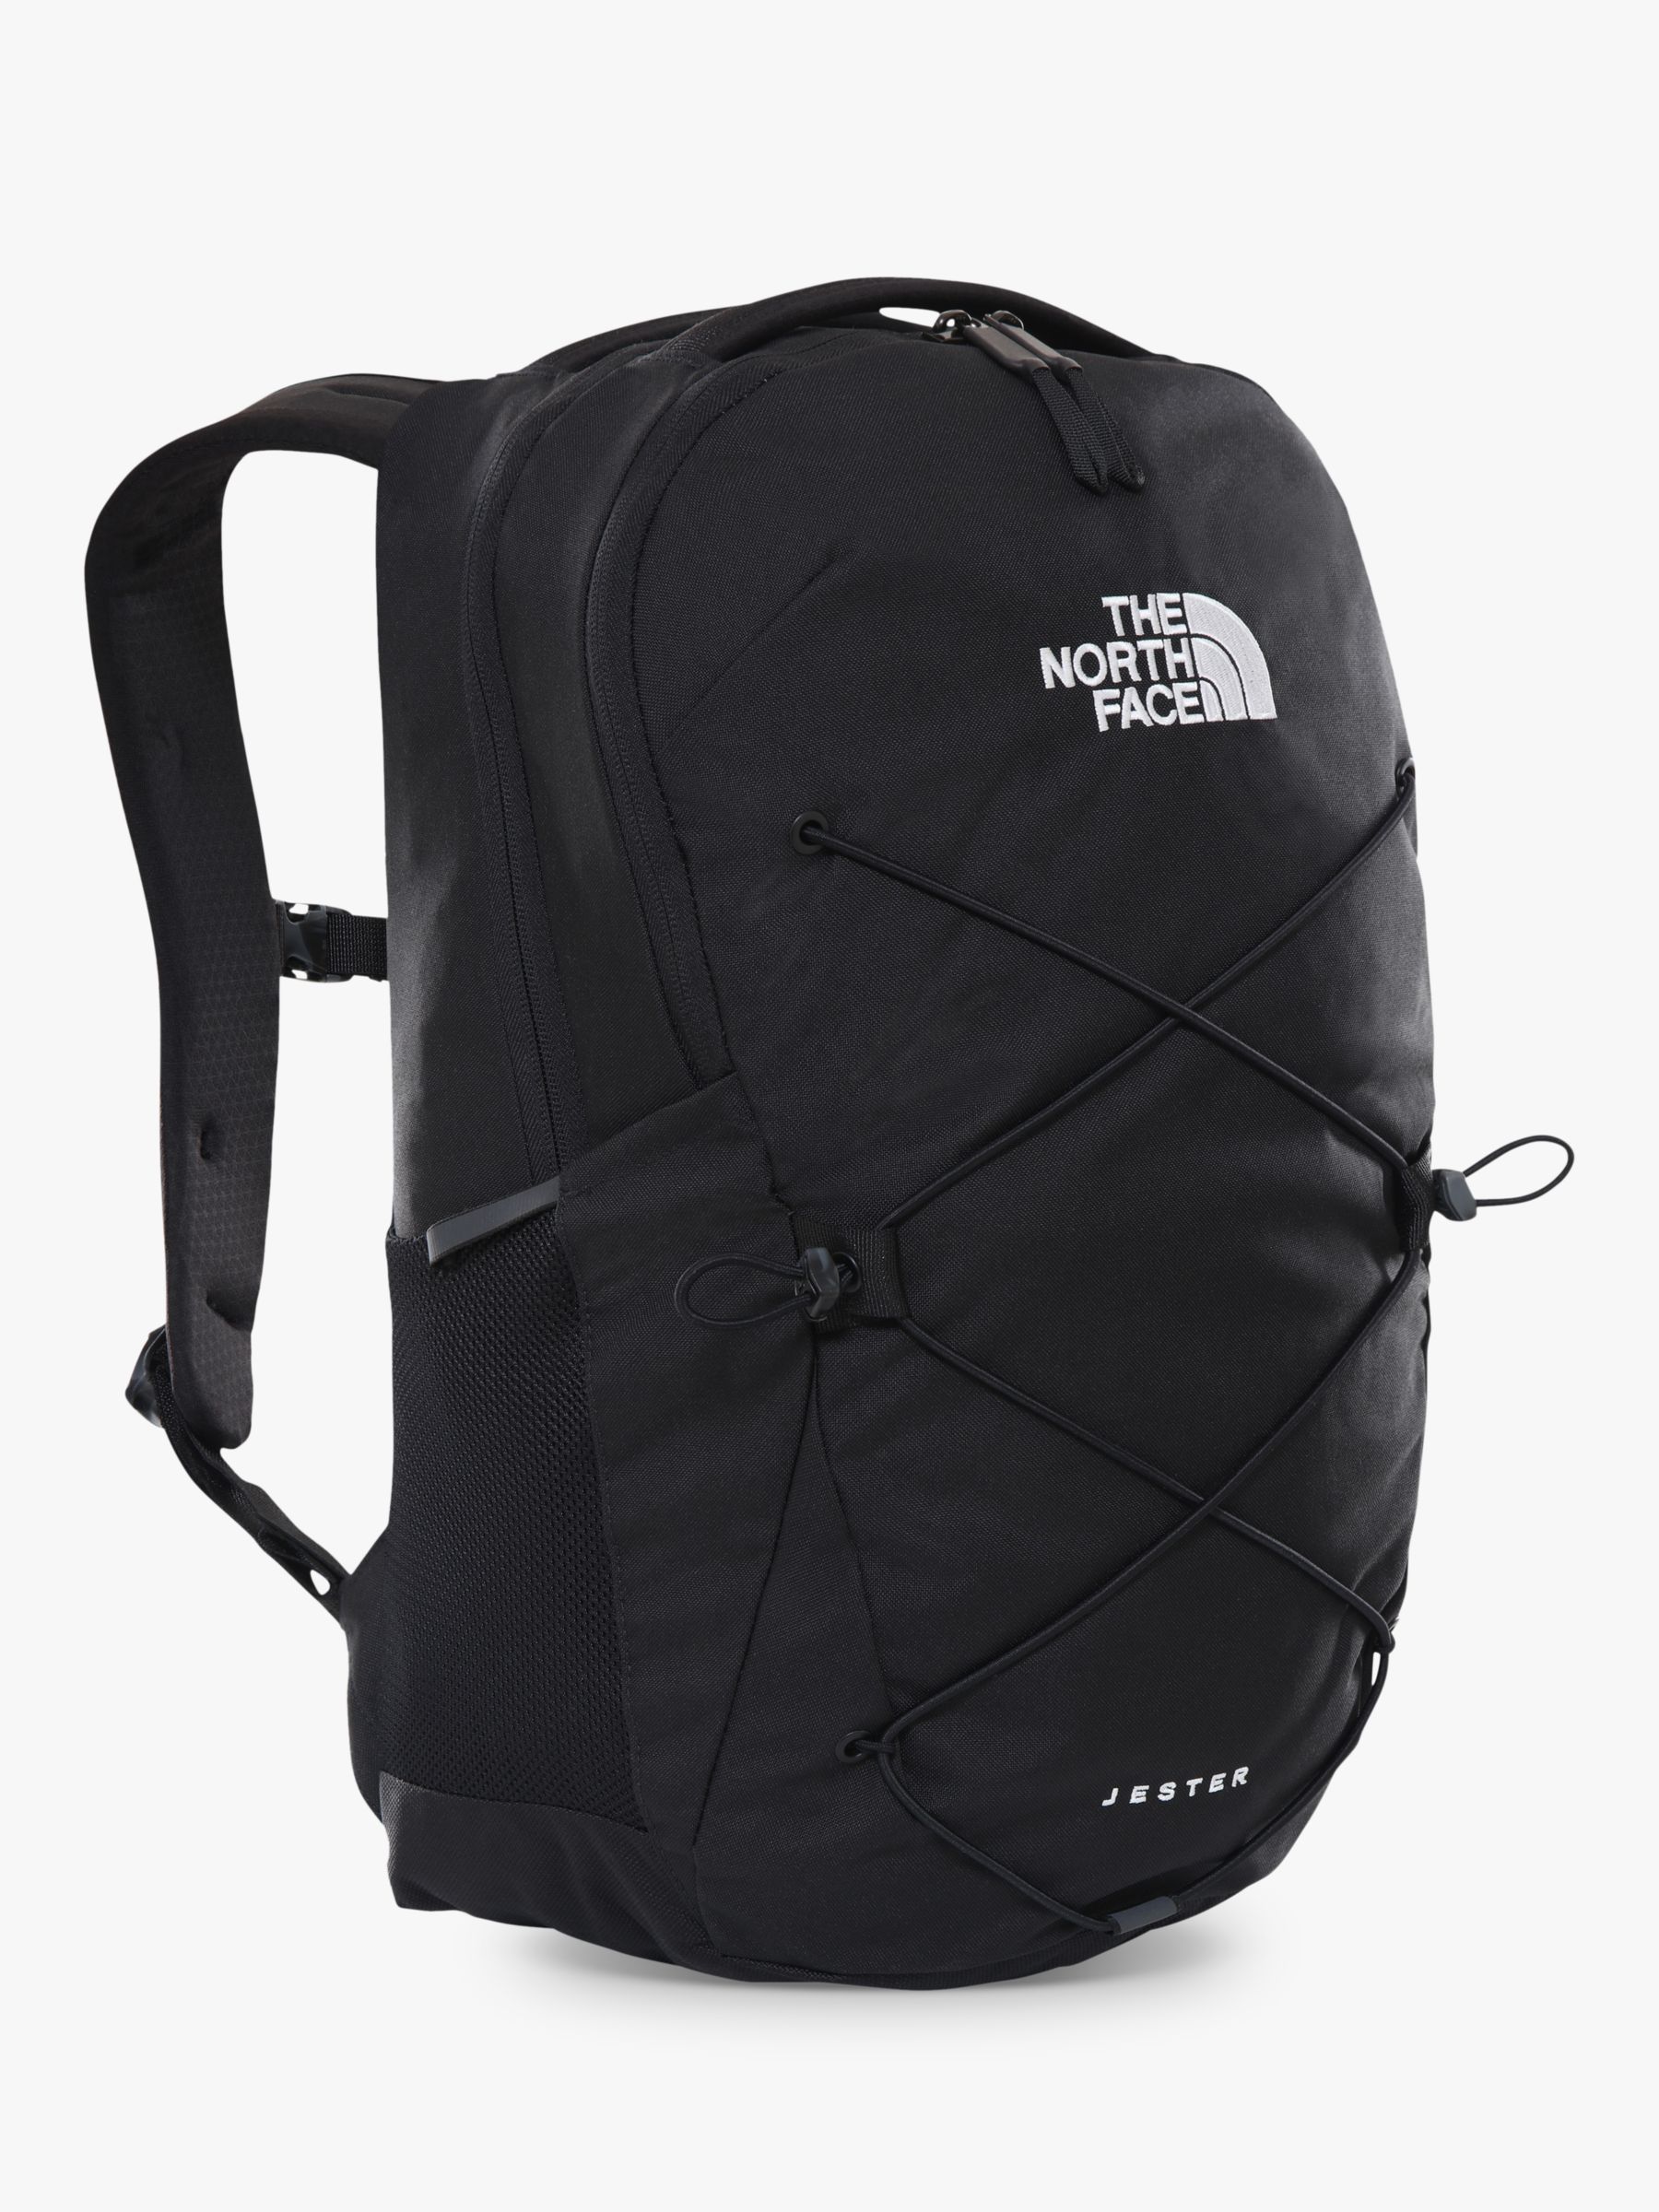 the north face jester black